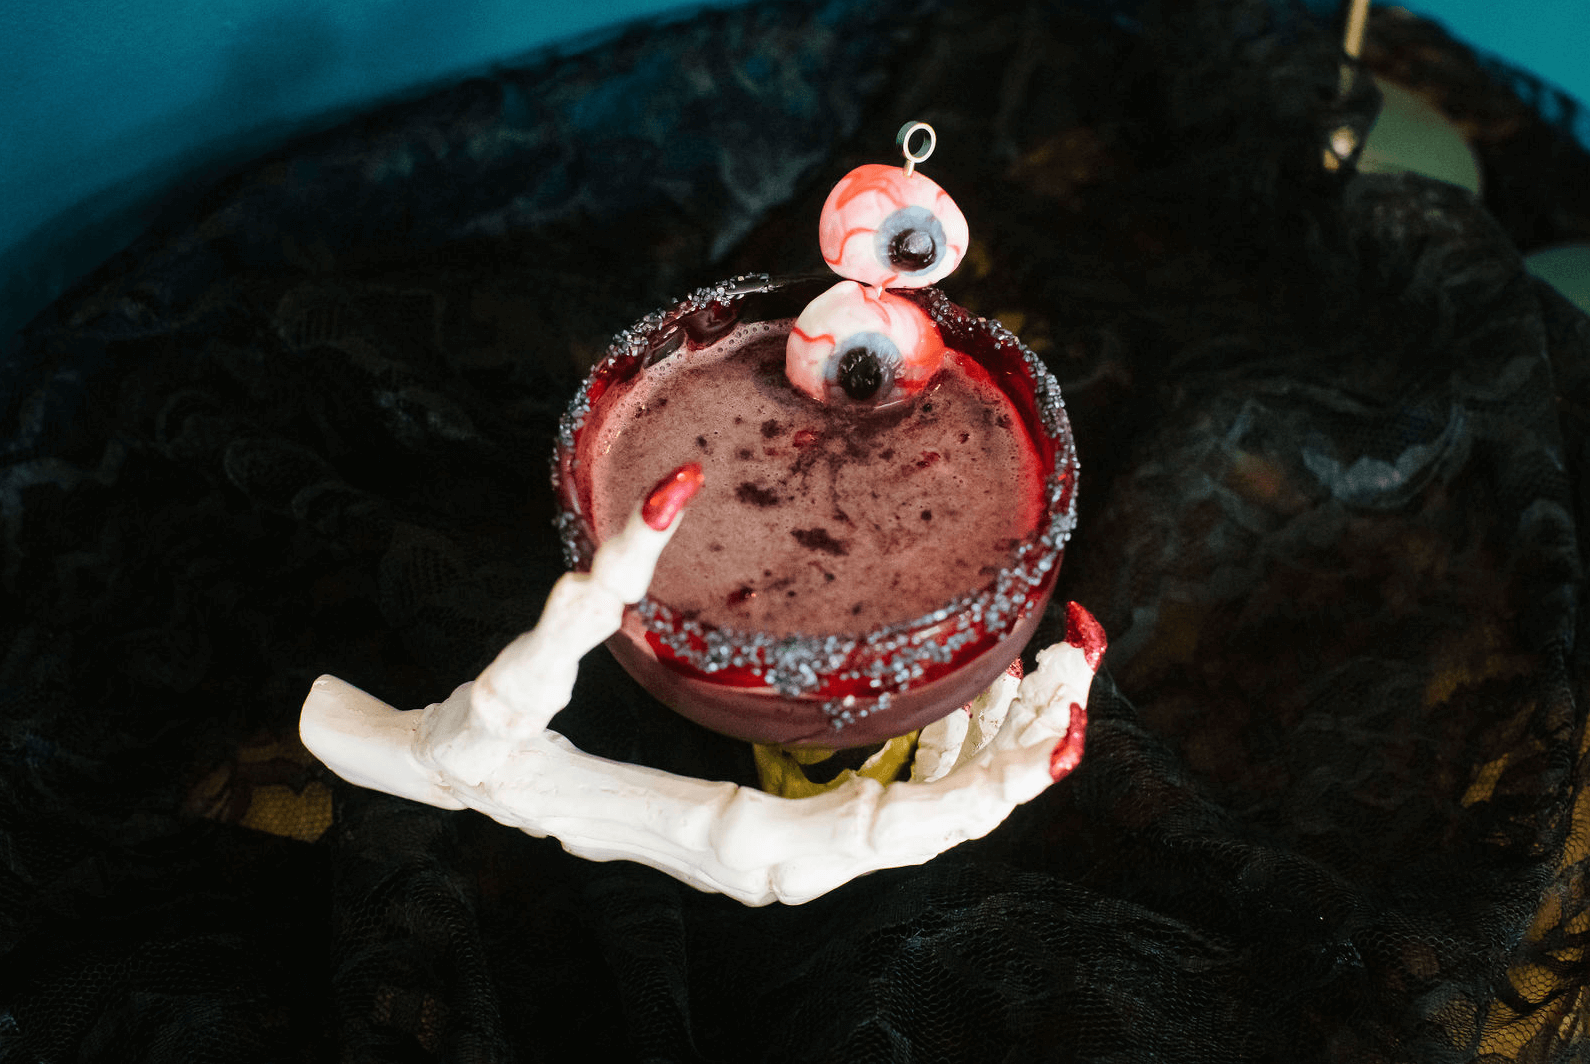 Enjoy a spooky twist on a classic cocktail with our Halloween margarita. Served with gummy worms, this drink is perfect for happy hour or as a fun addition to your cocktail subscription